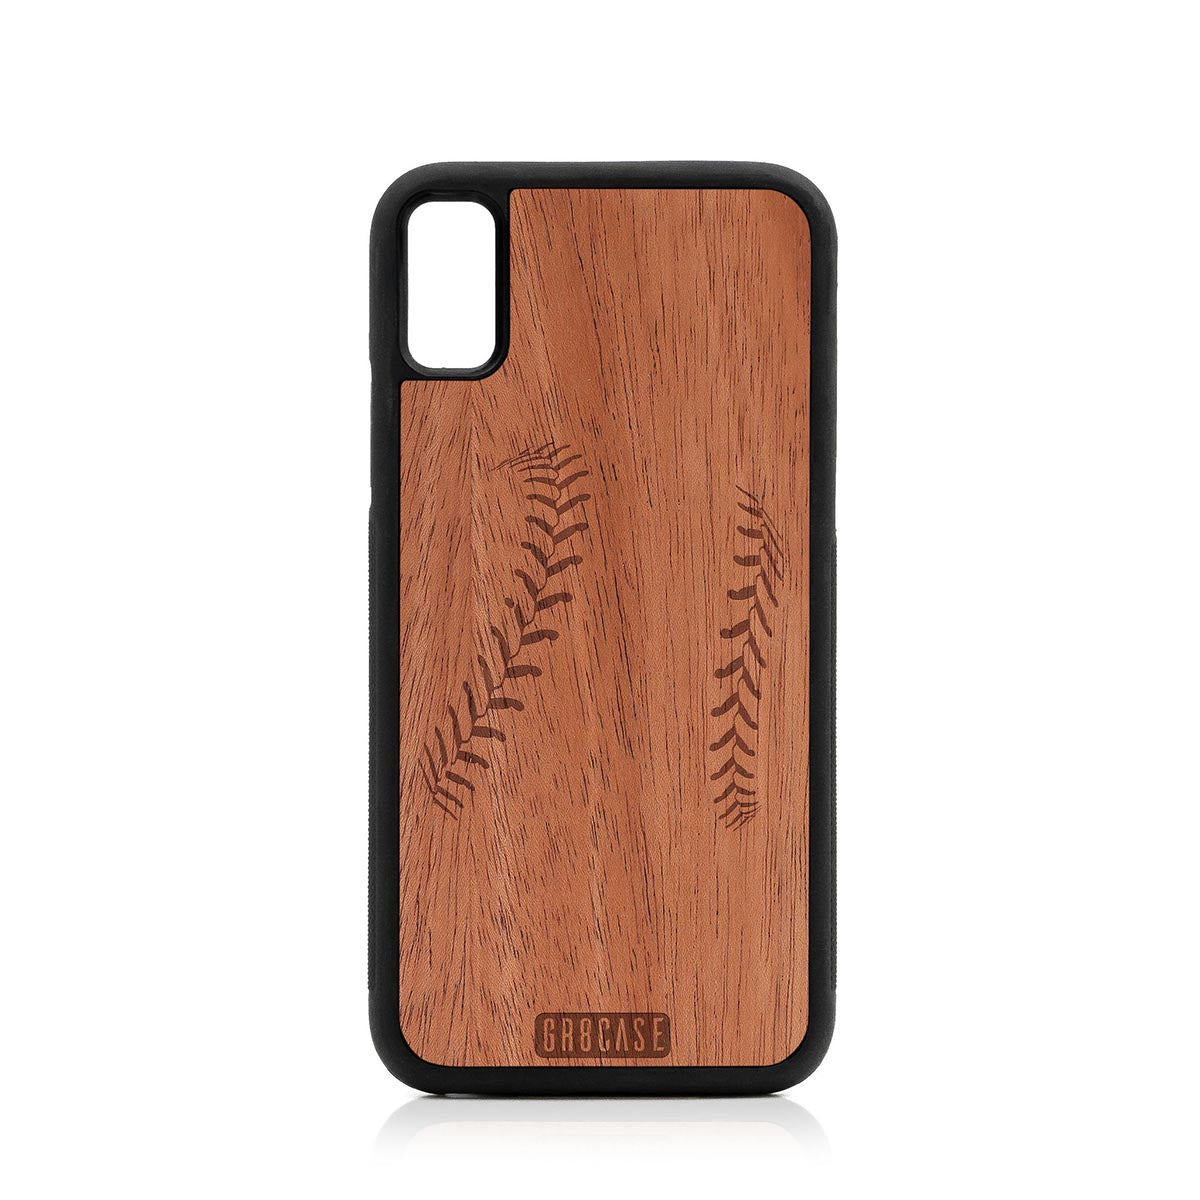 Baseball Stitches Design Wood Case For iPhone XS Max by GR8CASE